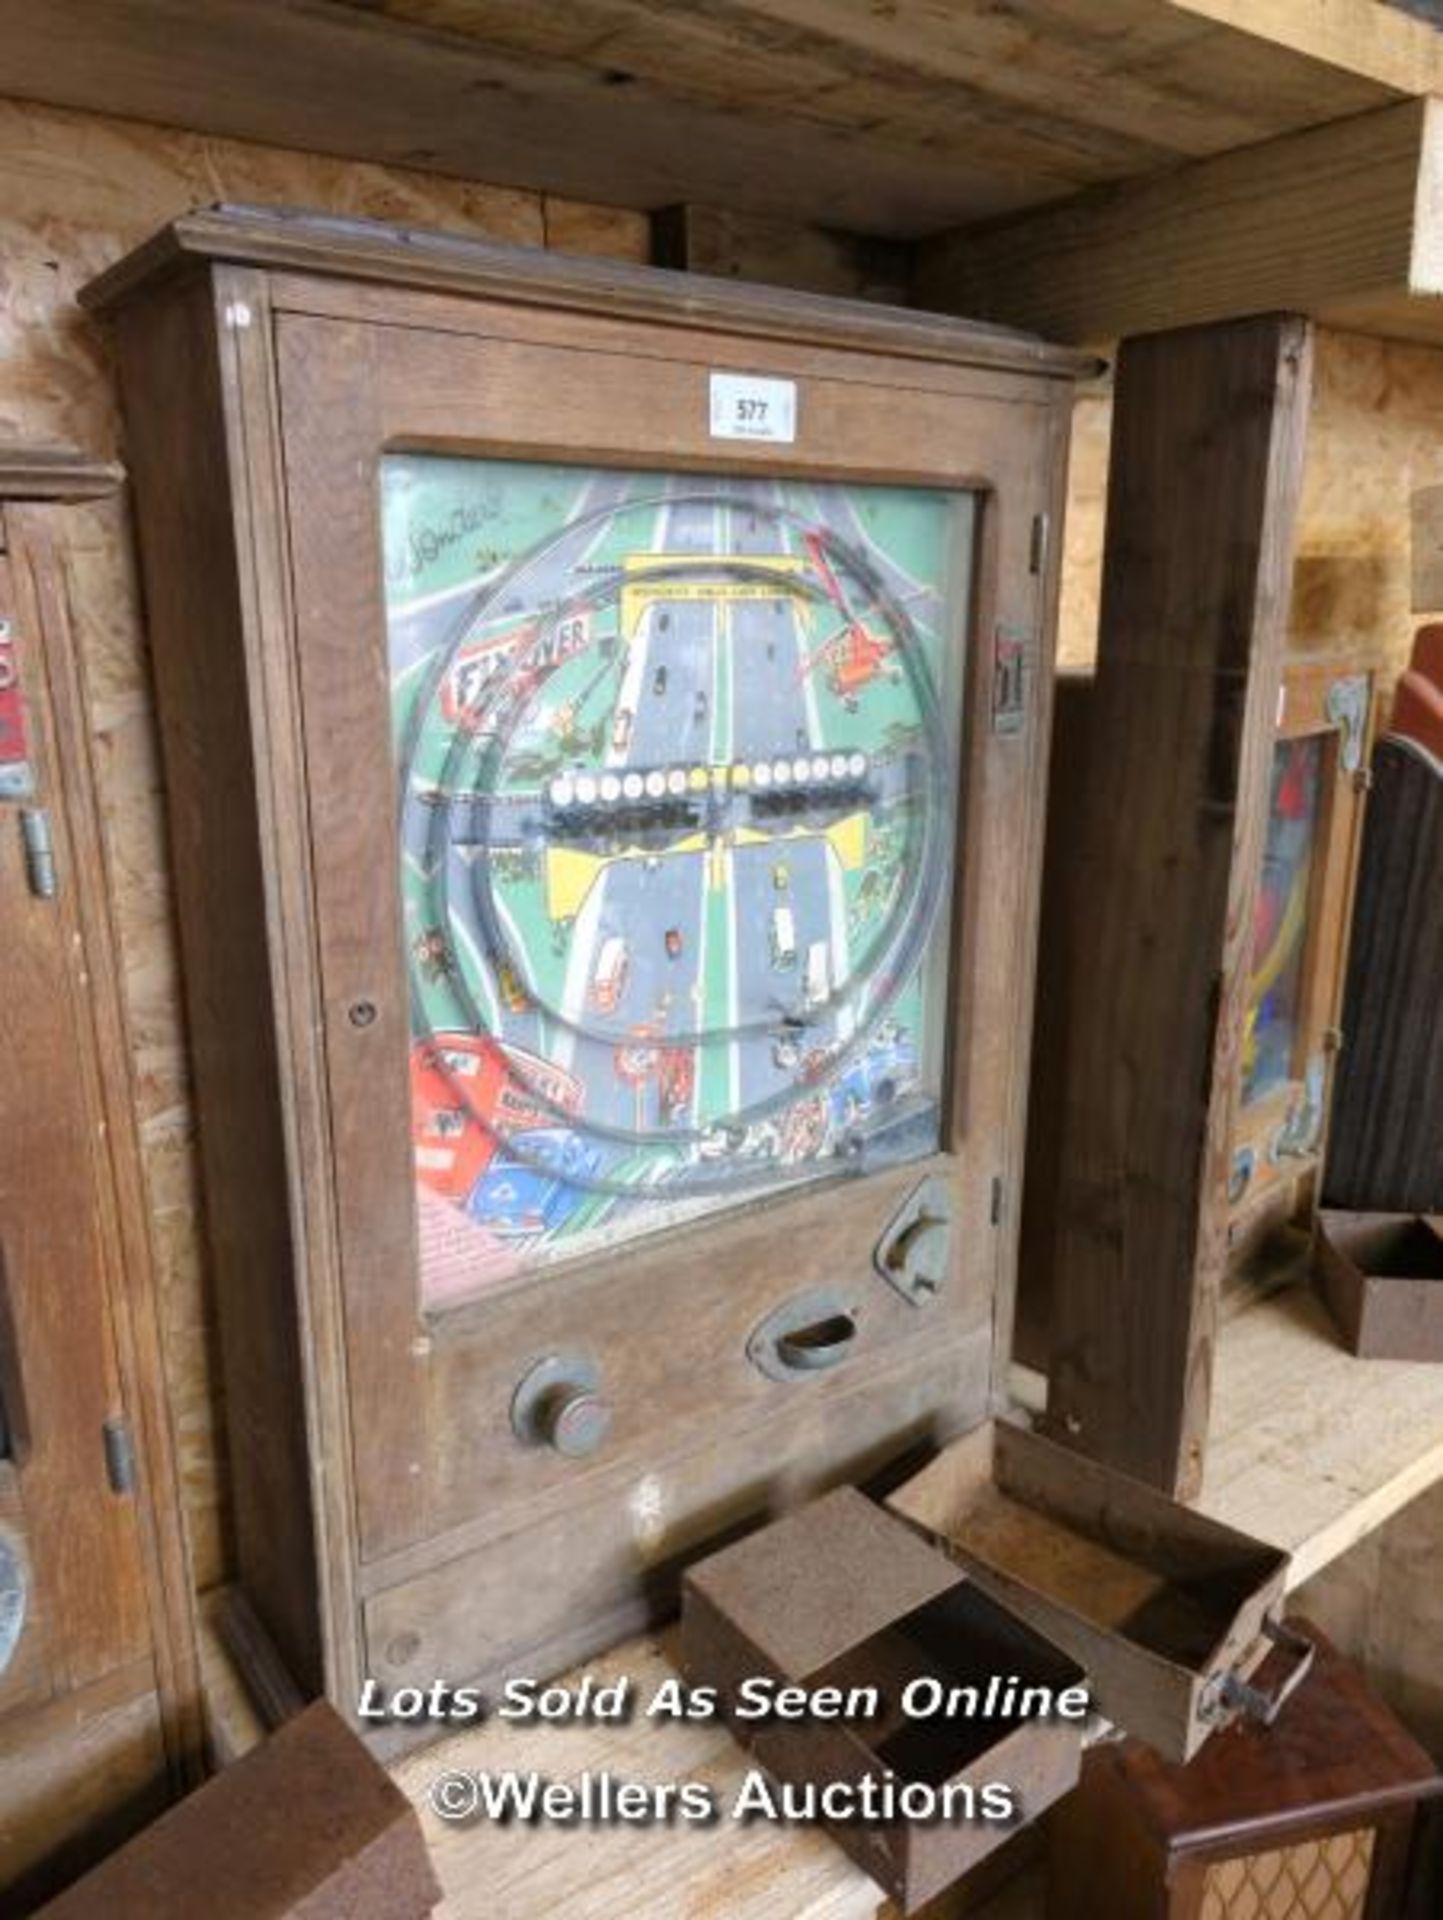 *VINTAGE FUN FIAR WONDERS 'WALLS LAST LONGER' SLOT MACHINE / ALL LOTS ARE LOCATED AT AUTHENTIC